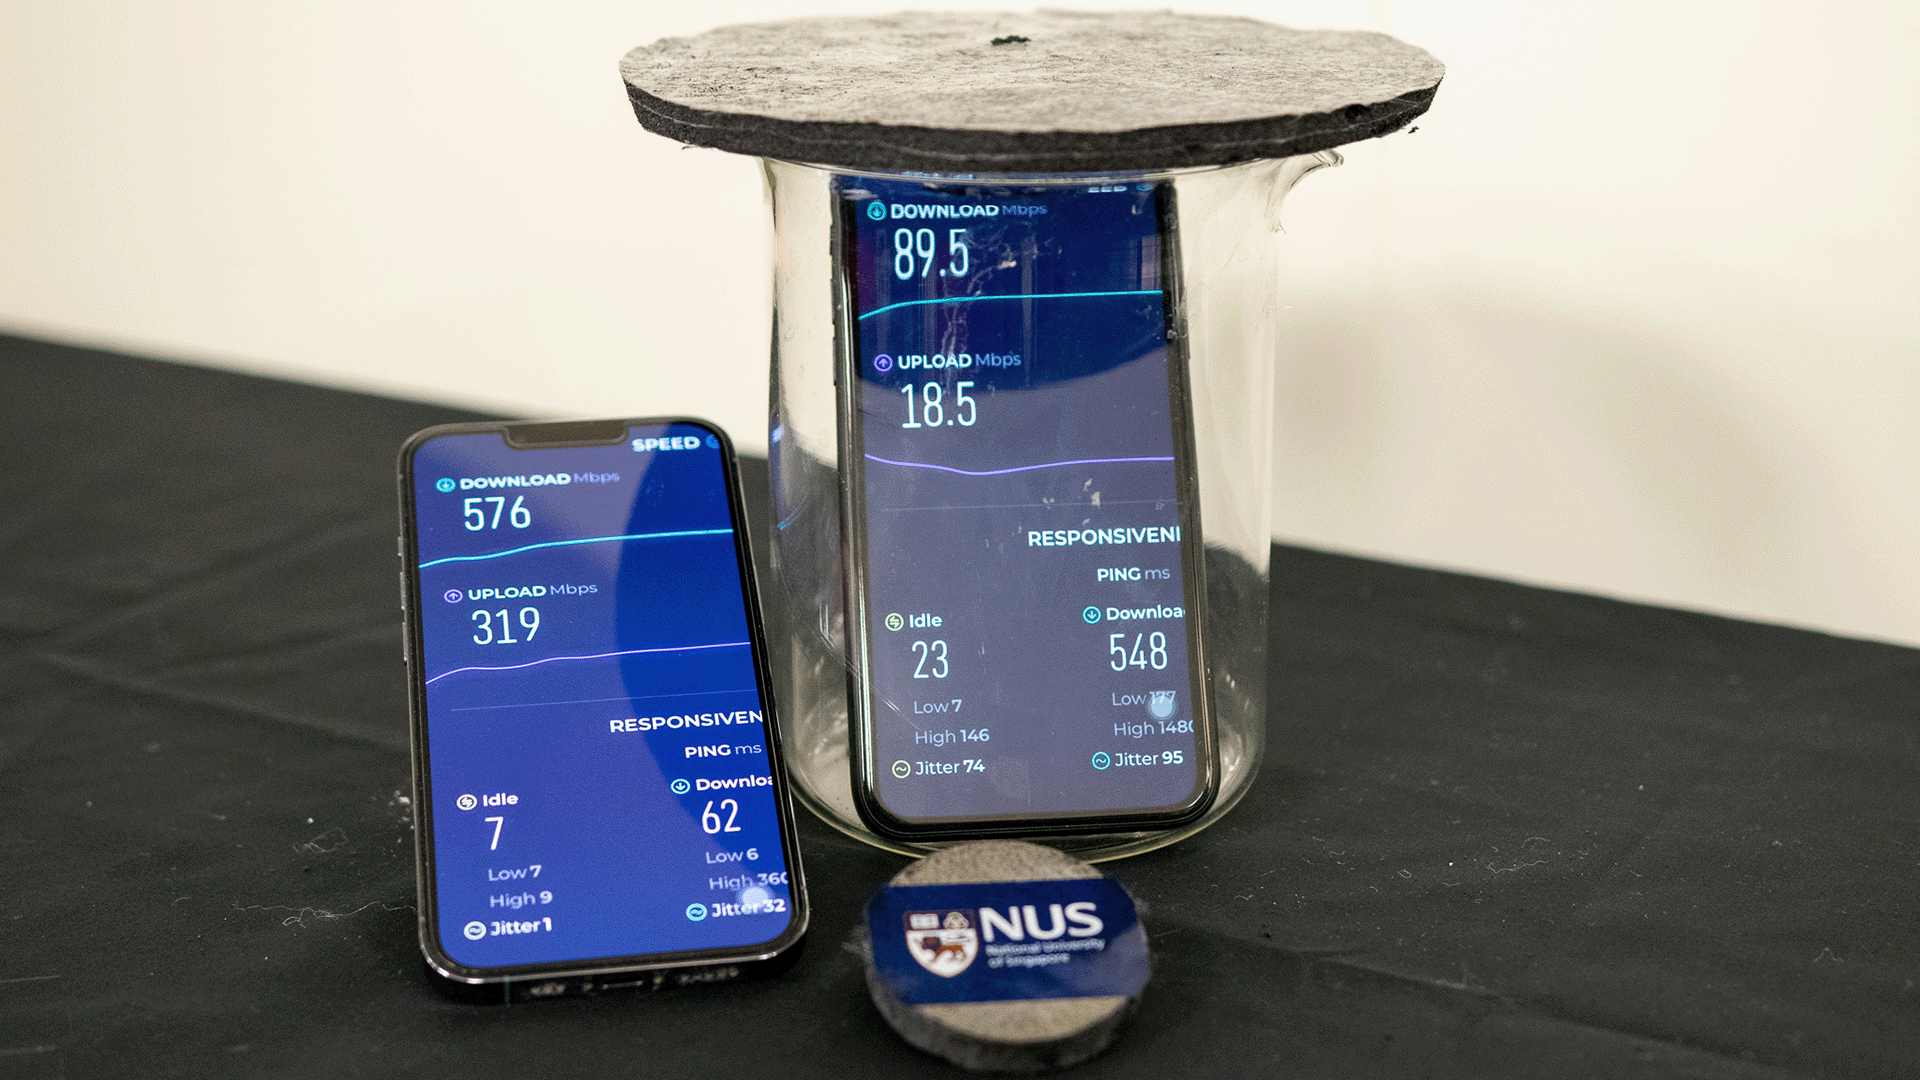 The research team  developed an innovative aerogel that demonstrates an impressive performance of absorbing electromagnetic energy. In this demonstration, the mobile phone shielded by the grey aerogel recorded a significantly slower WiFi speed, indicating the absorption of electromagnetic waves received by the phone.